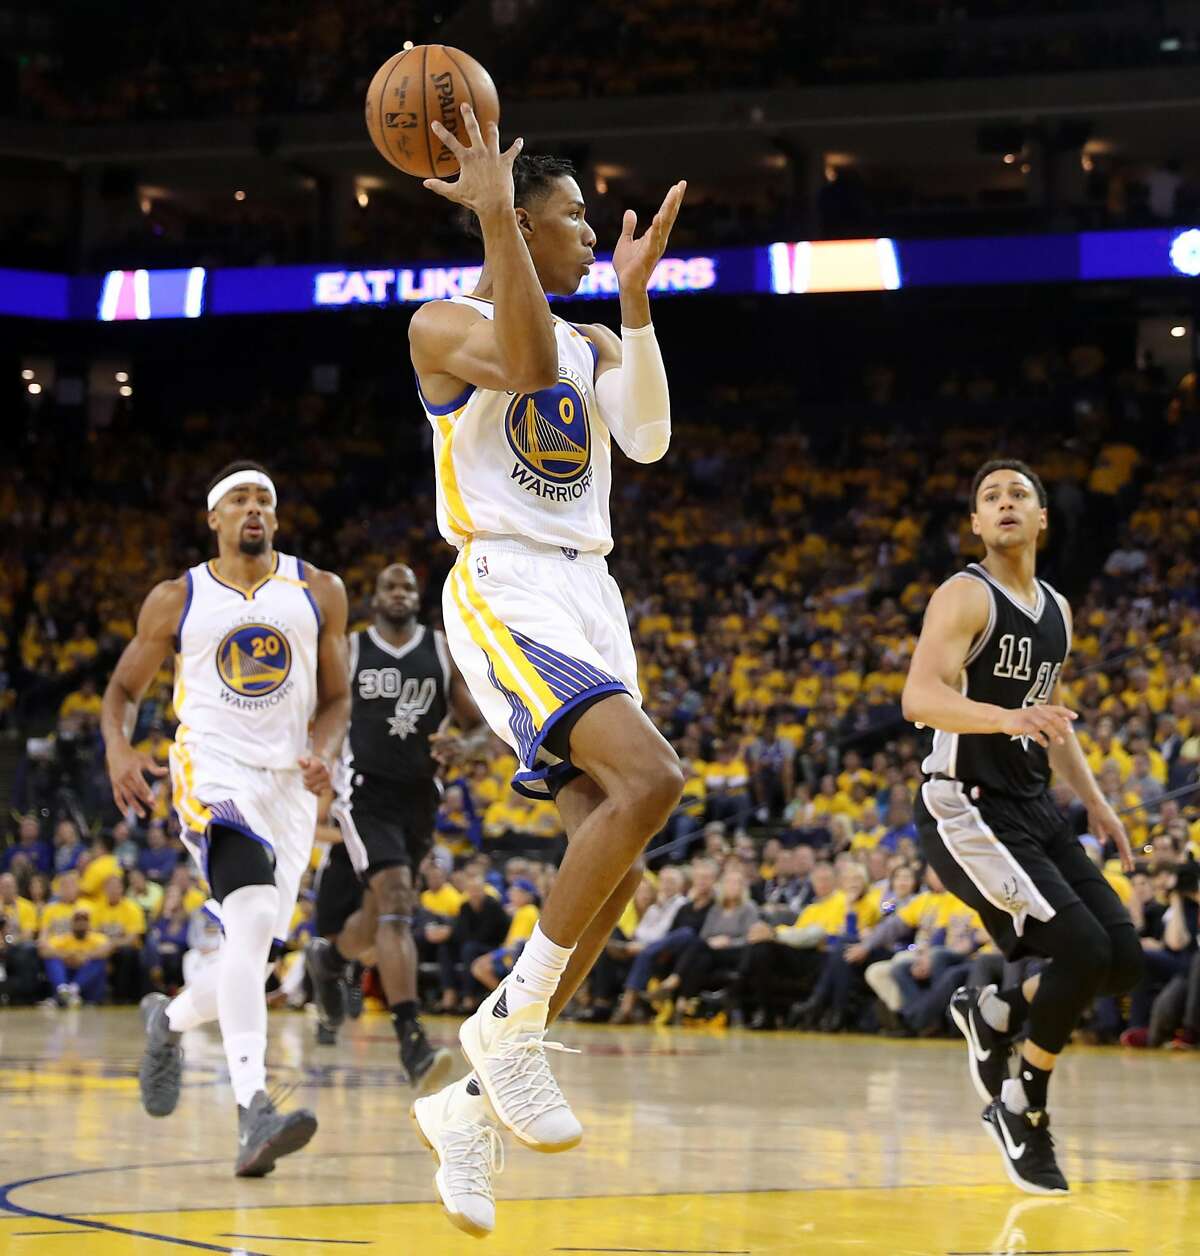 Golden State Warriors' Patrick McCaw makes a pass to James Michael McAdoo during Warriors' 136-100 win over San Antonio Spurs in Game 2 of NBA Western Conference Finals in Oakland, Calif., on Tuesday, May 16, 2017.